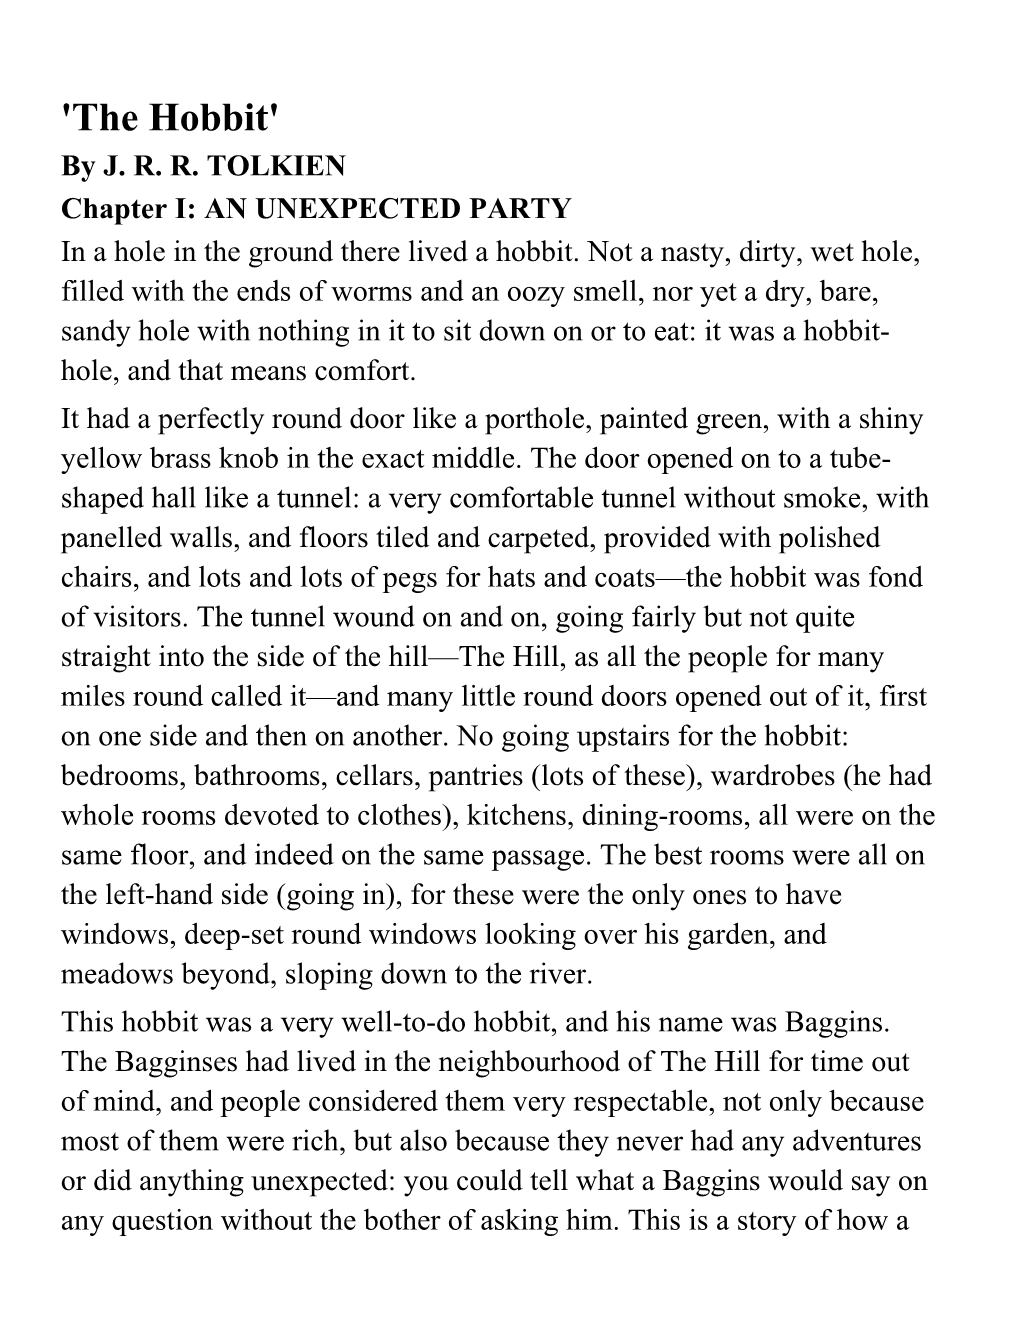 Chapter I: an UNEXPECTED PARTY